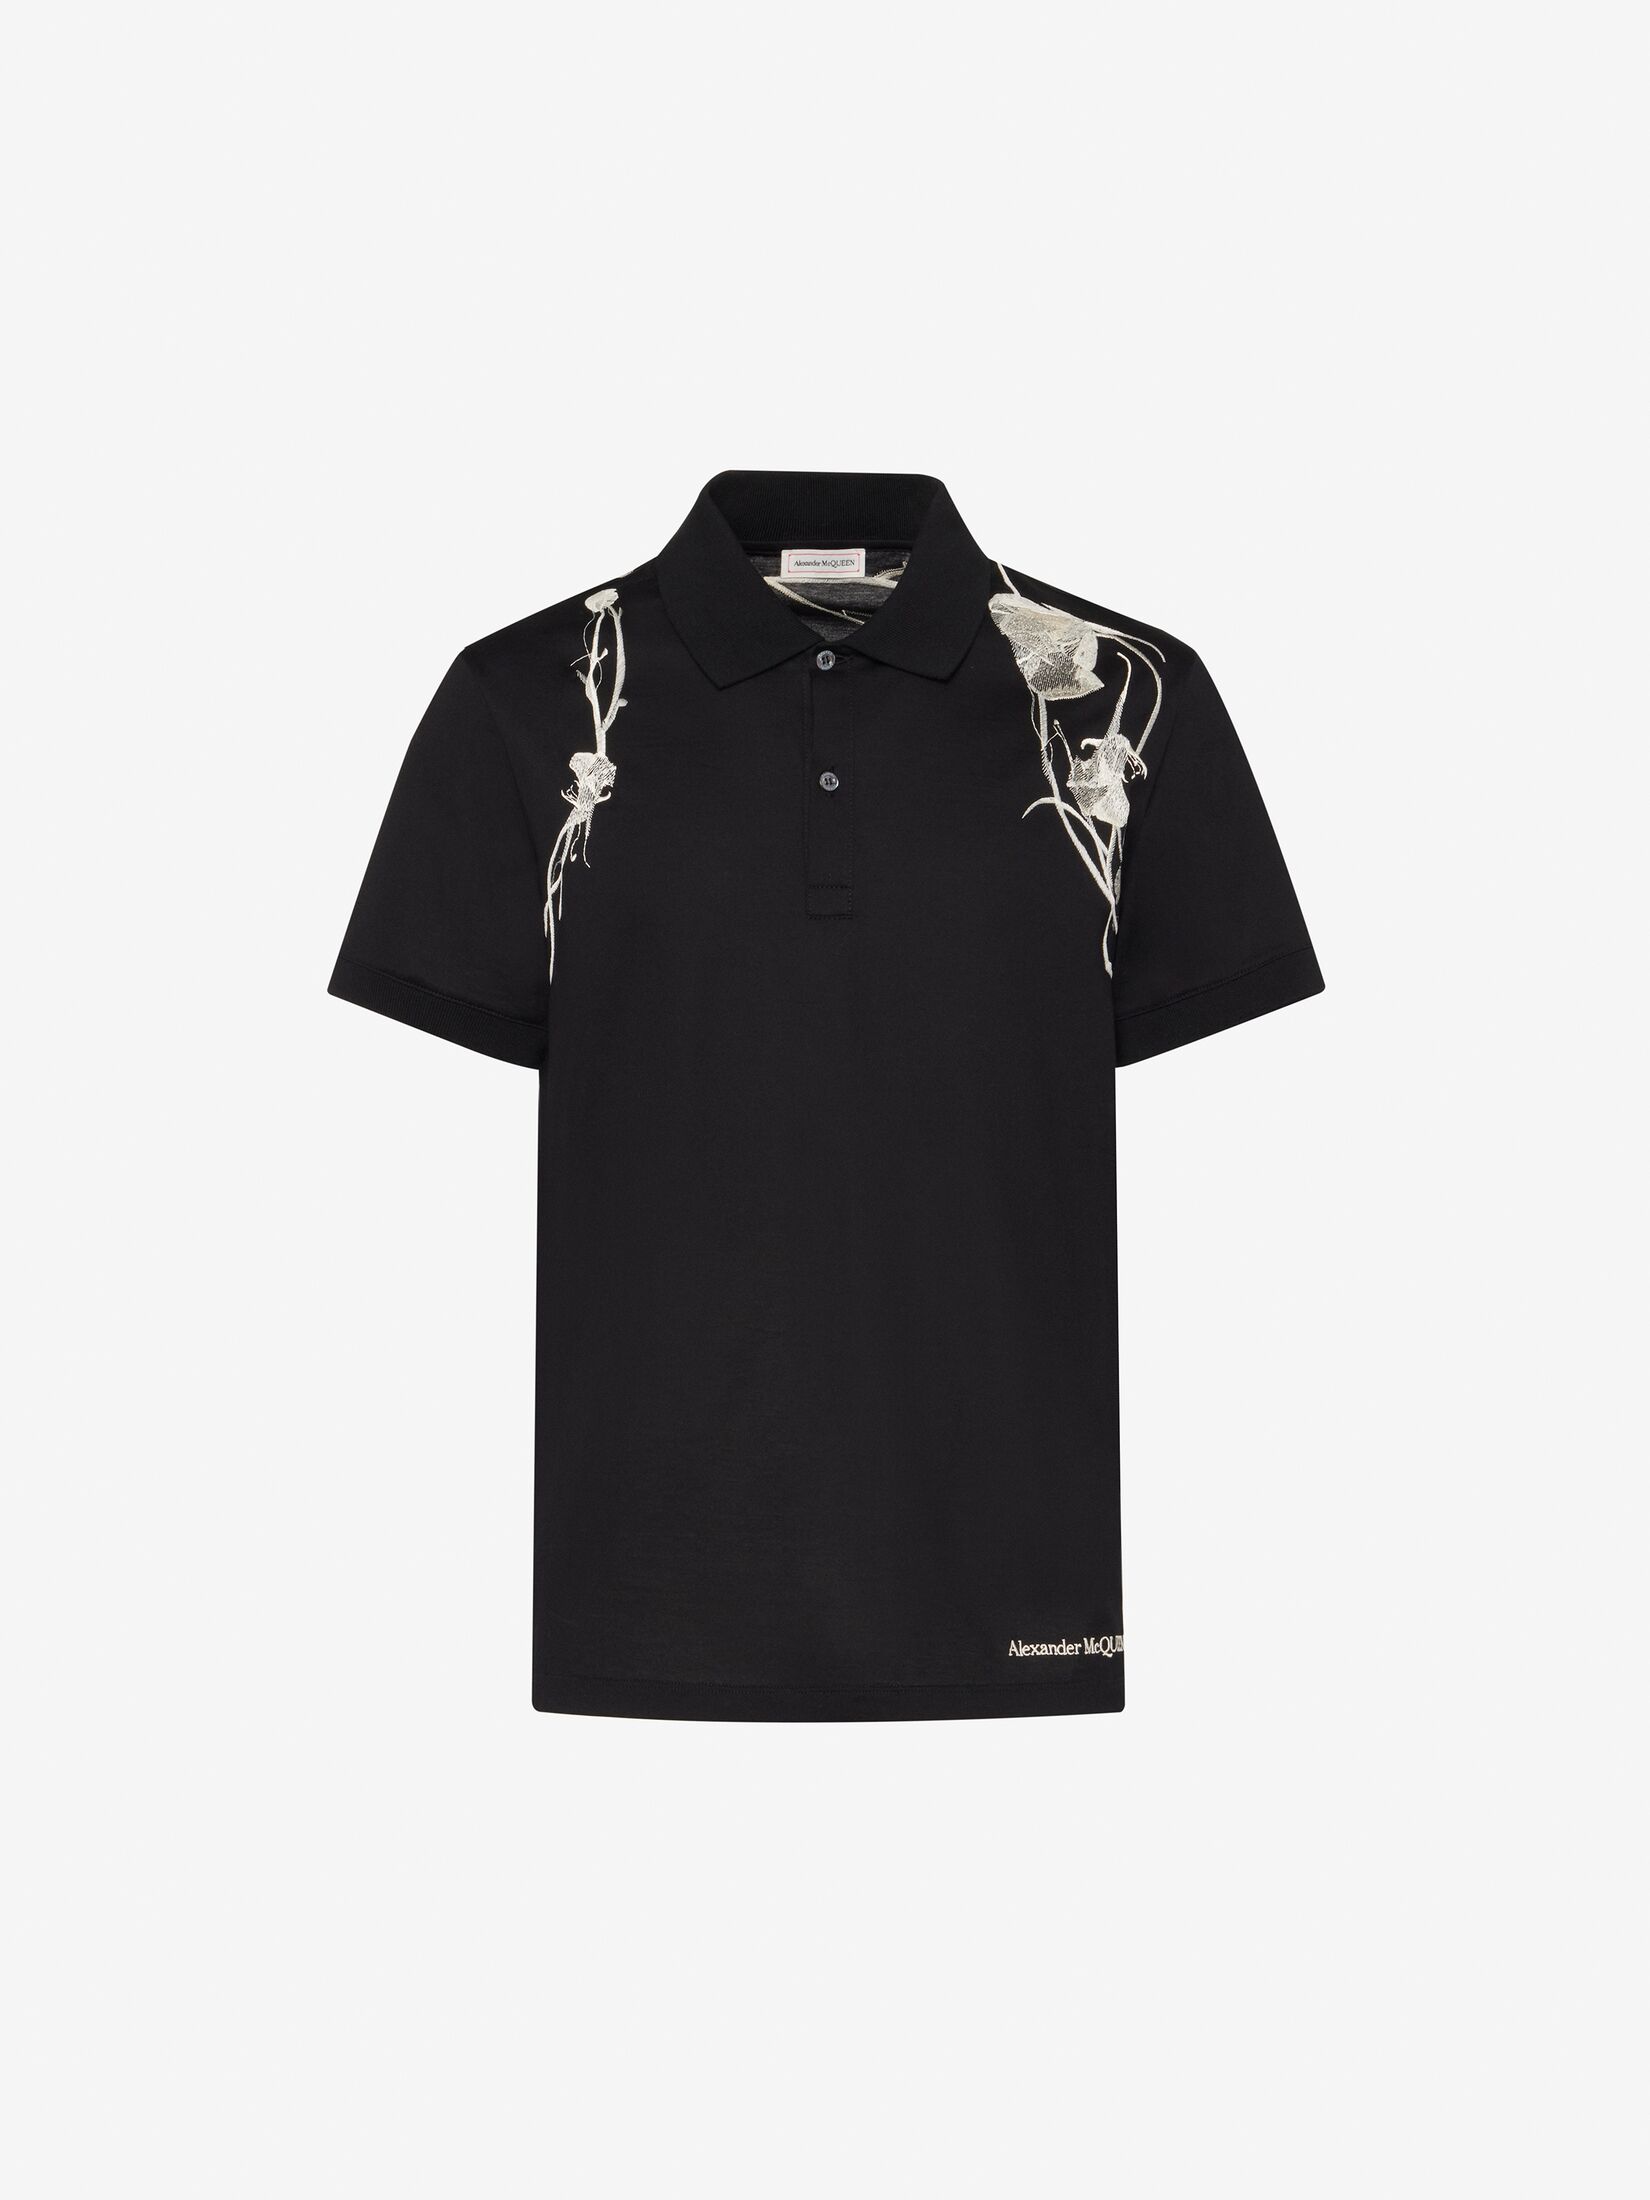 Pressed Flower Harness Polo Shirt